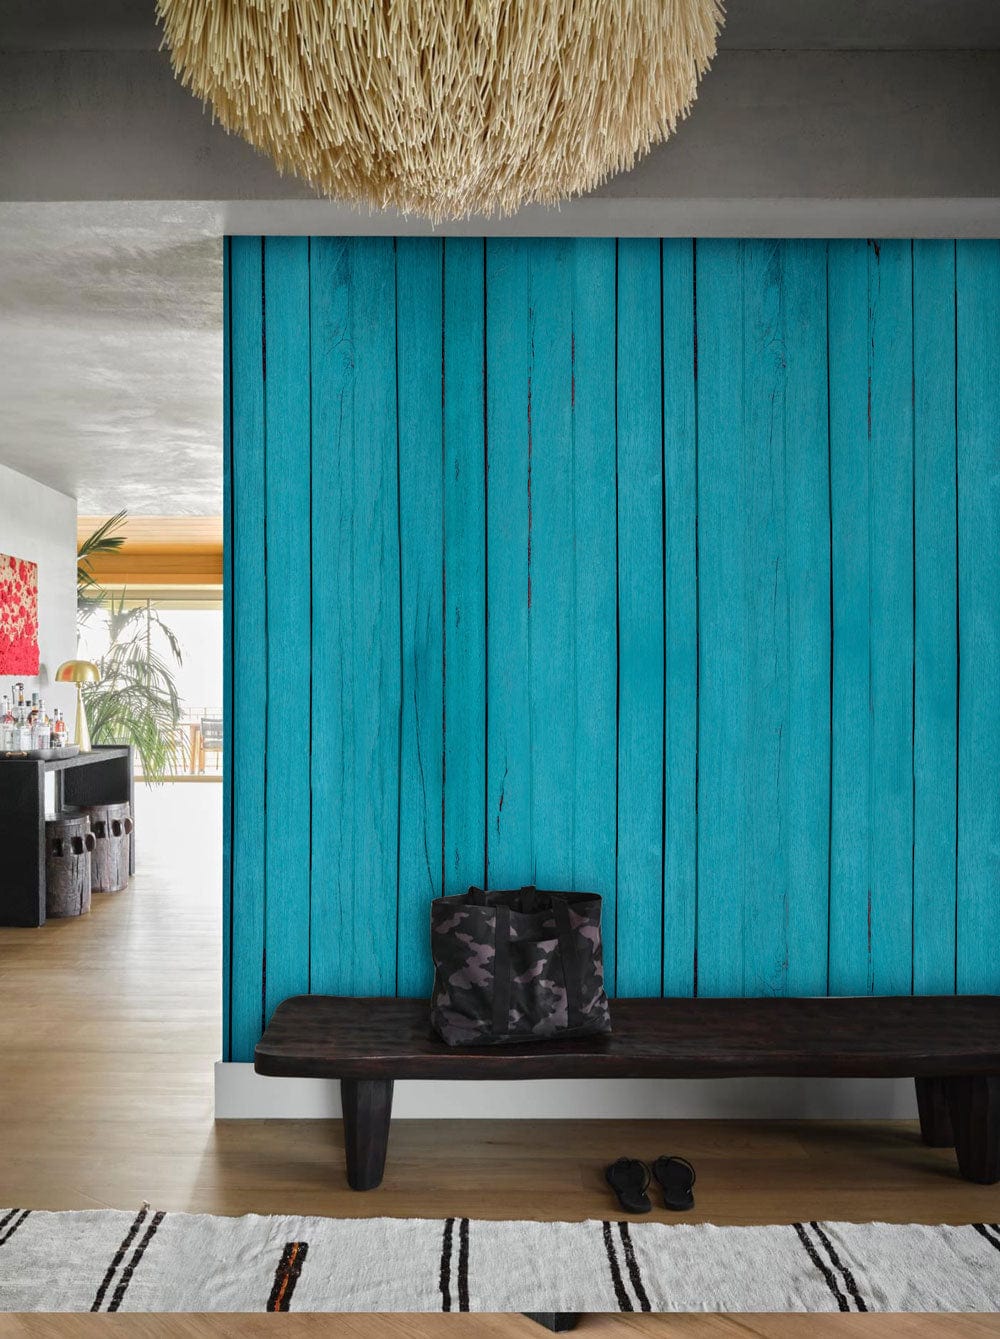 for a hallway, bespoke wood effect wall murals in vibrant turquoise